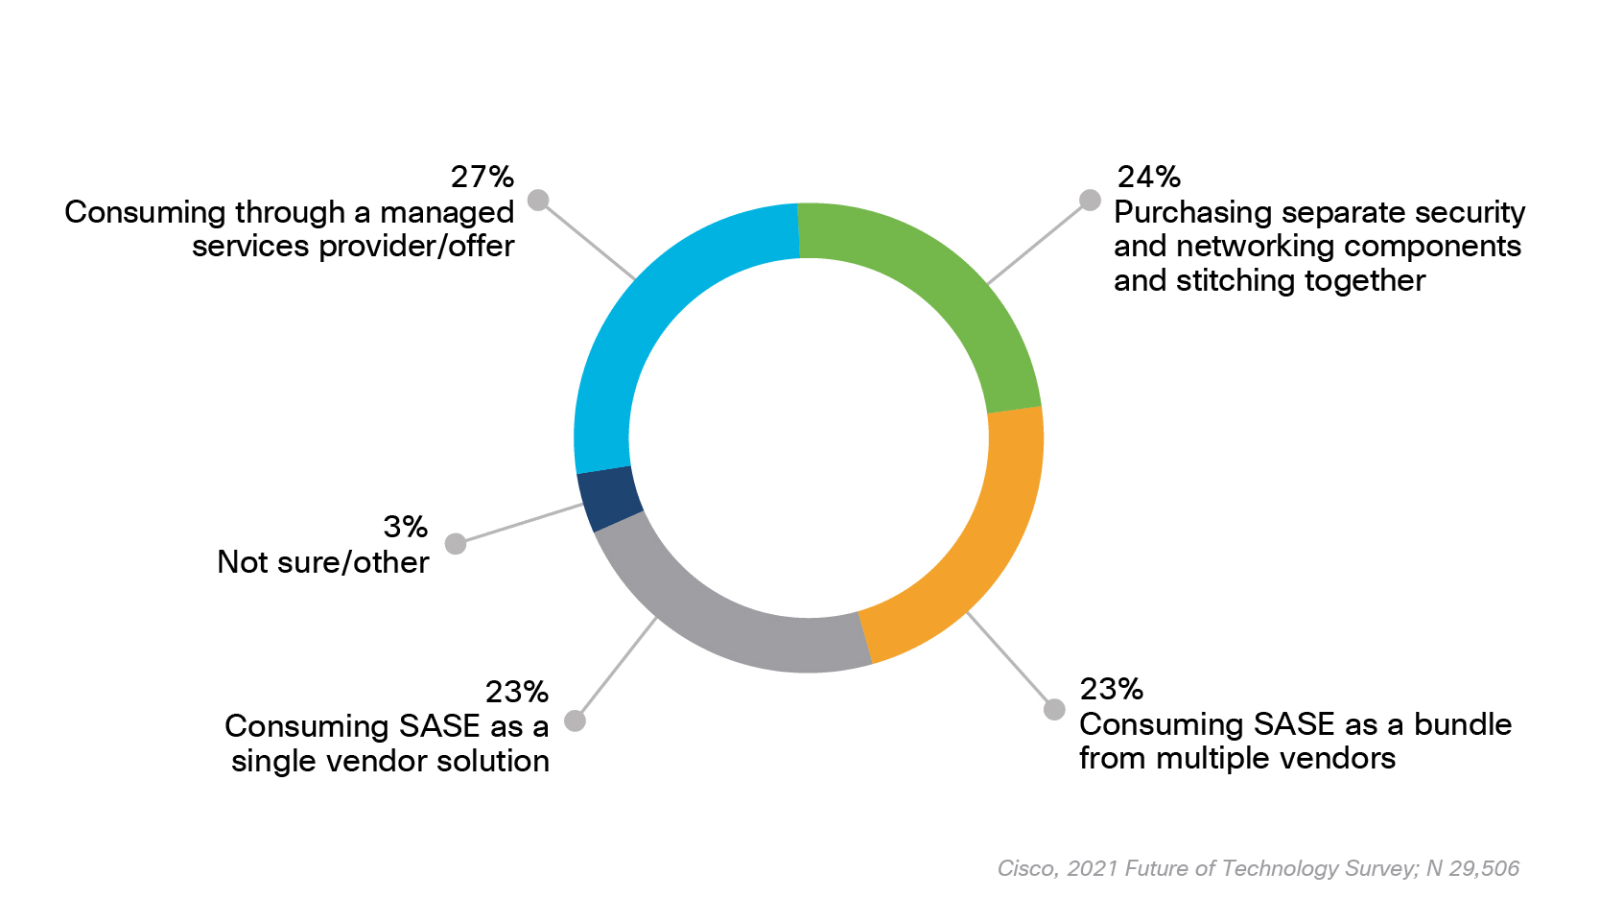 Graph showing respondents preferred SASE deployment and operational model. 27% said consuming through a managed services provider/offer, 24% said purchasing separate security and networking components and stitching together, 23% said consuming SASE as a bundle from multiple vendors, 23% said consuming SASE as a single vendor solution, 3% said not sure/other.